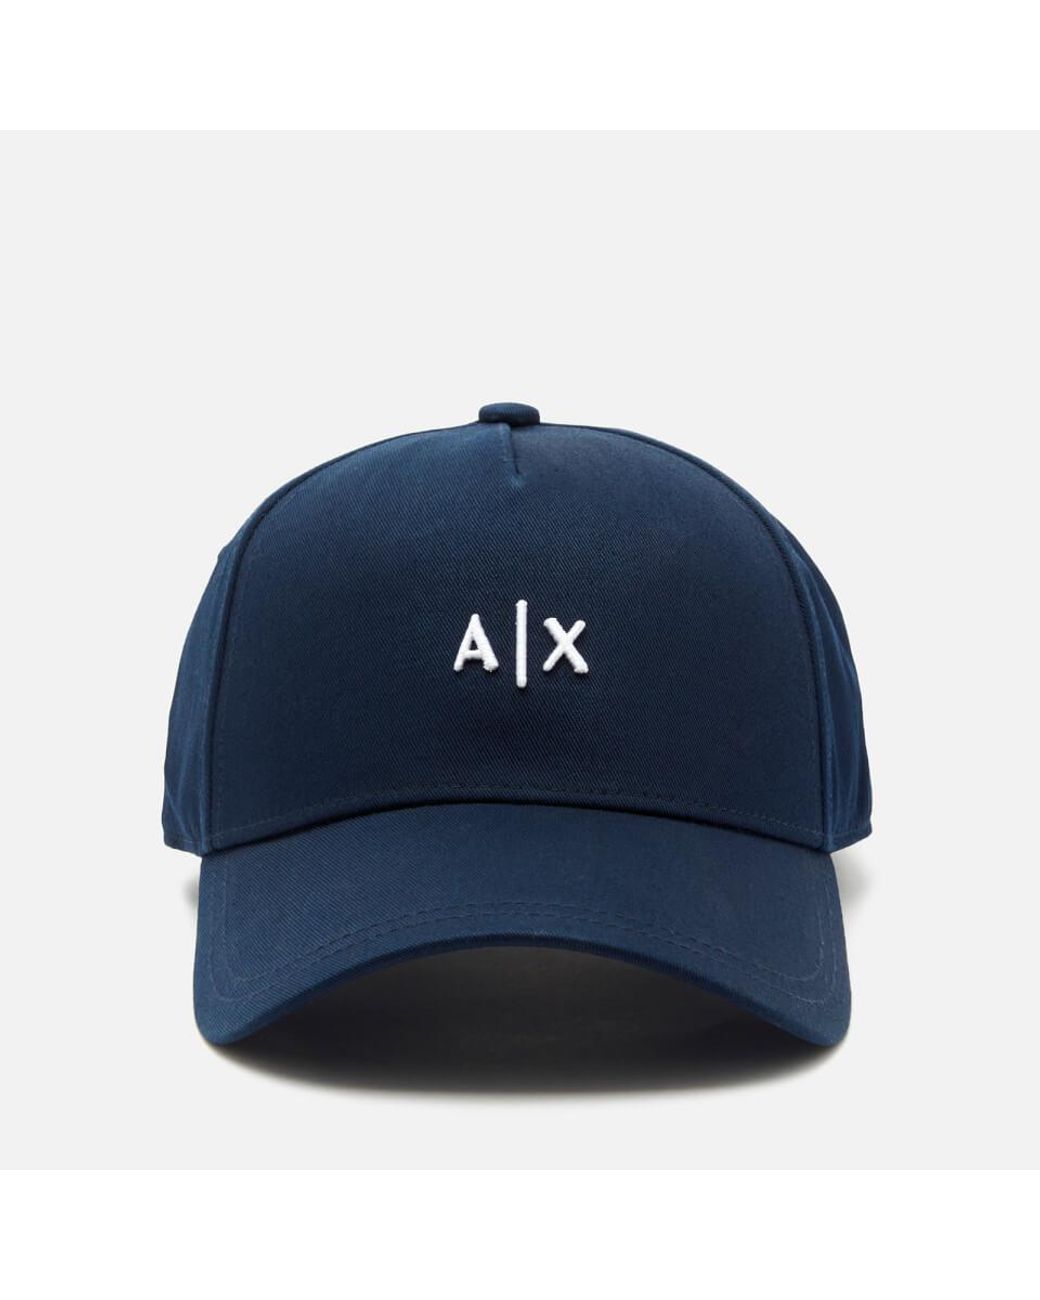 Armani Exchange Cotton Small Logo Cap in Blue for Men - Lyst